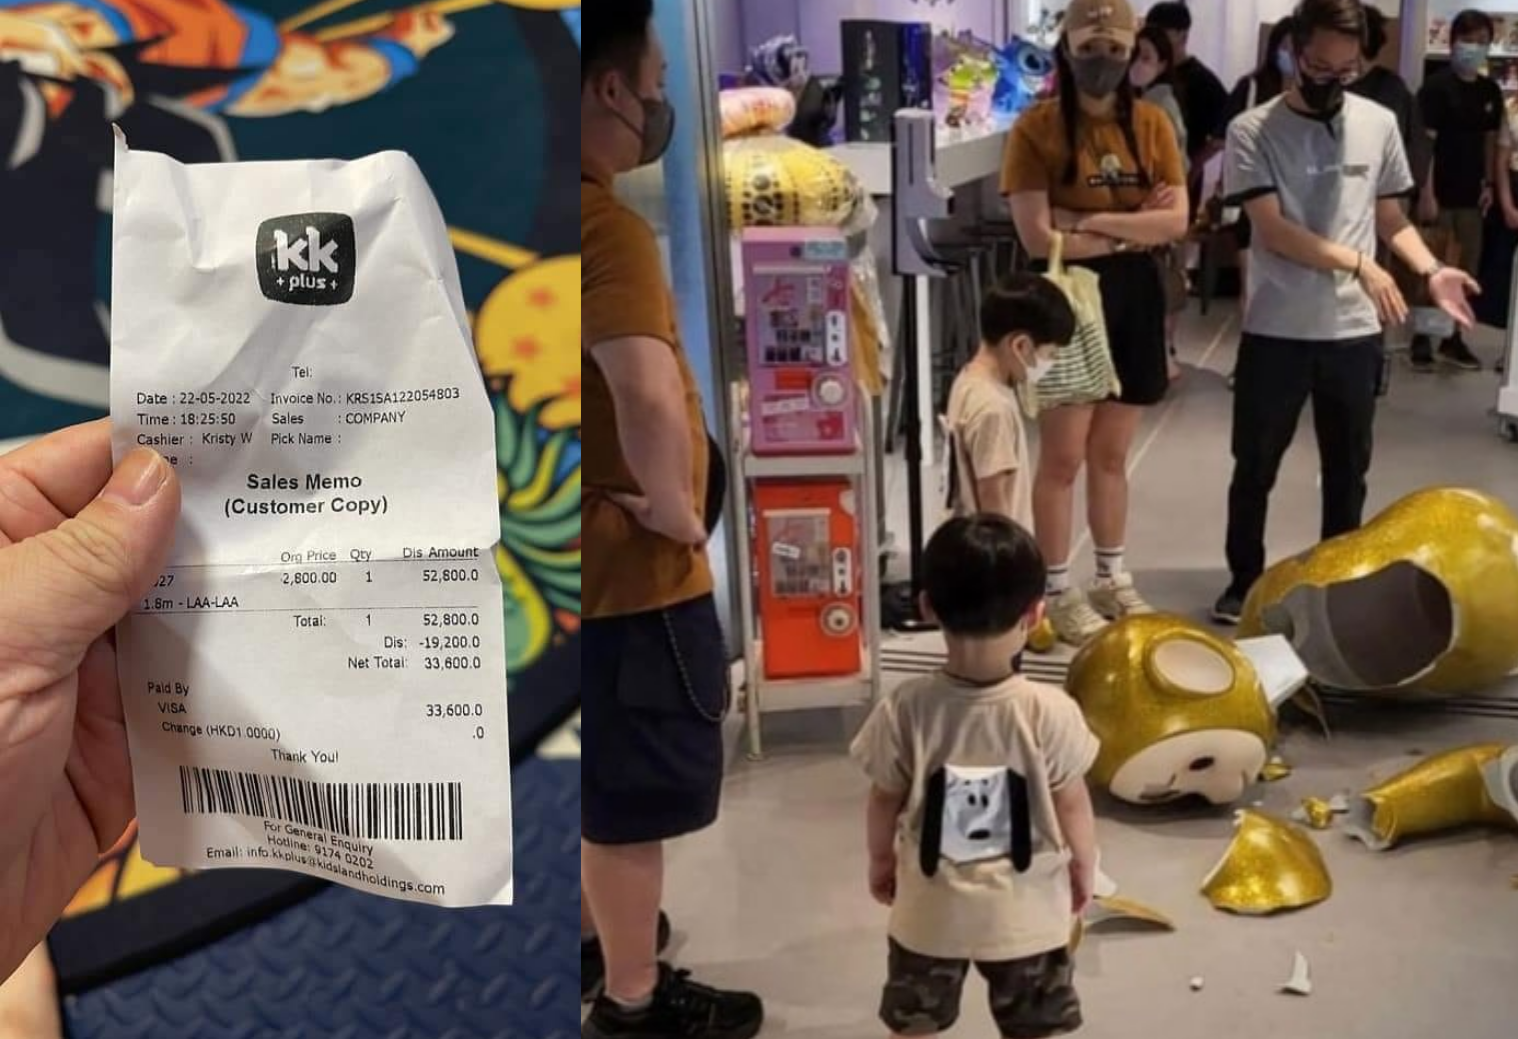 The kid's father initially paid for the damages but was fully refunded after. Unfortunately, the store had received many negative backlashes due to the incident. 